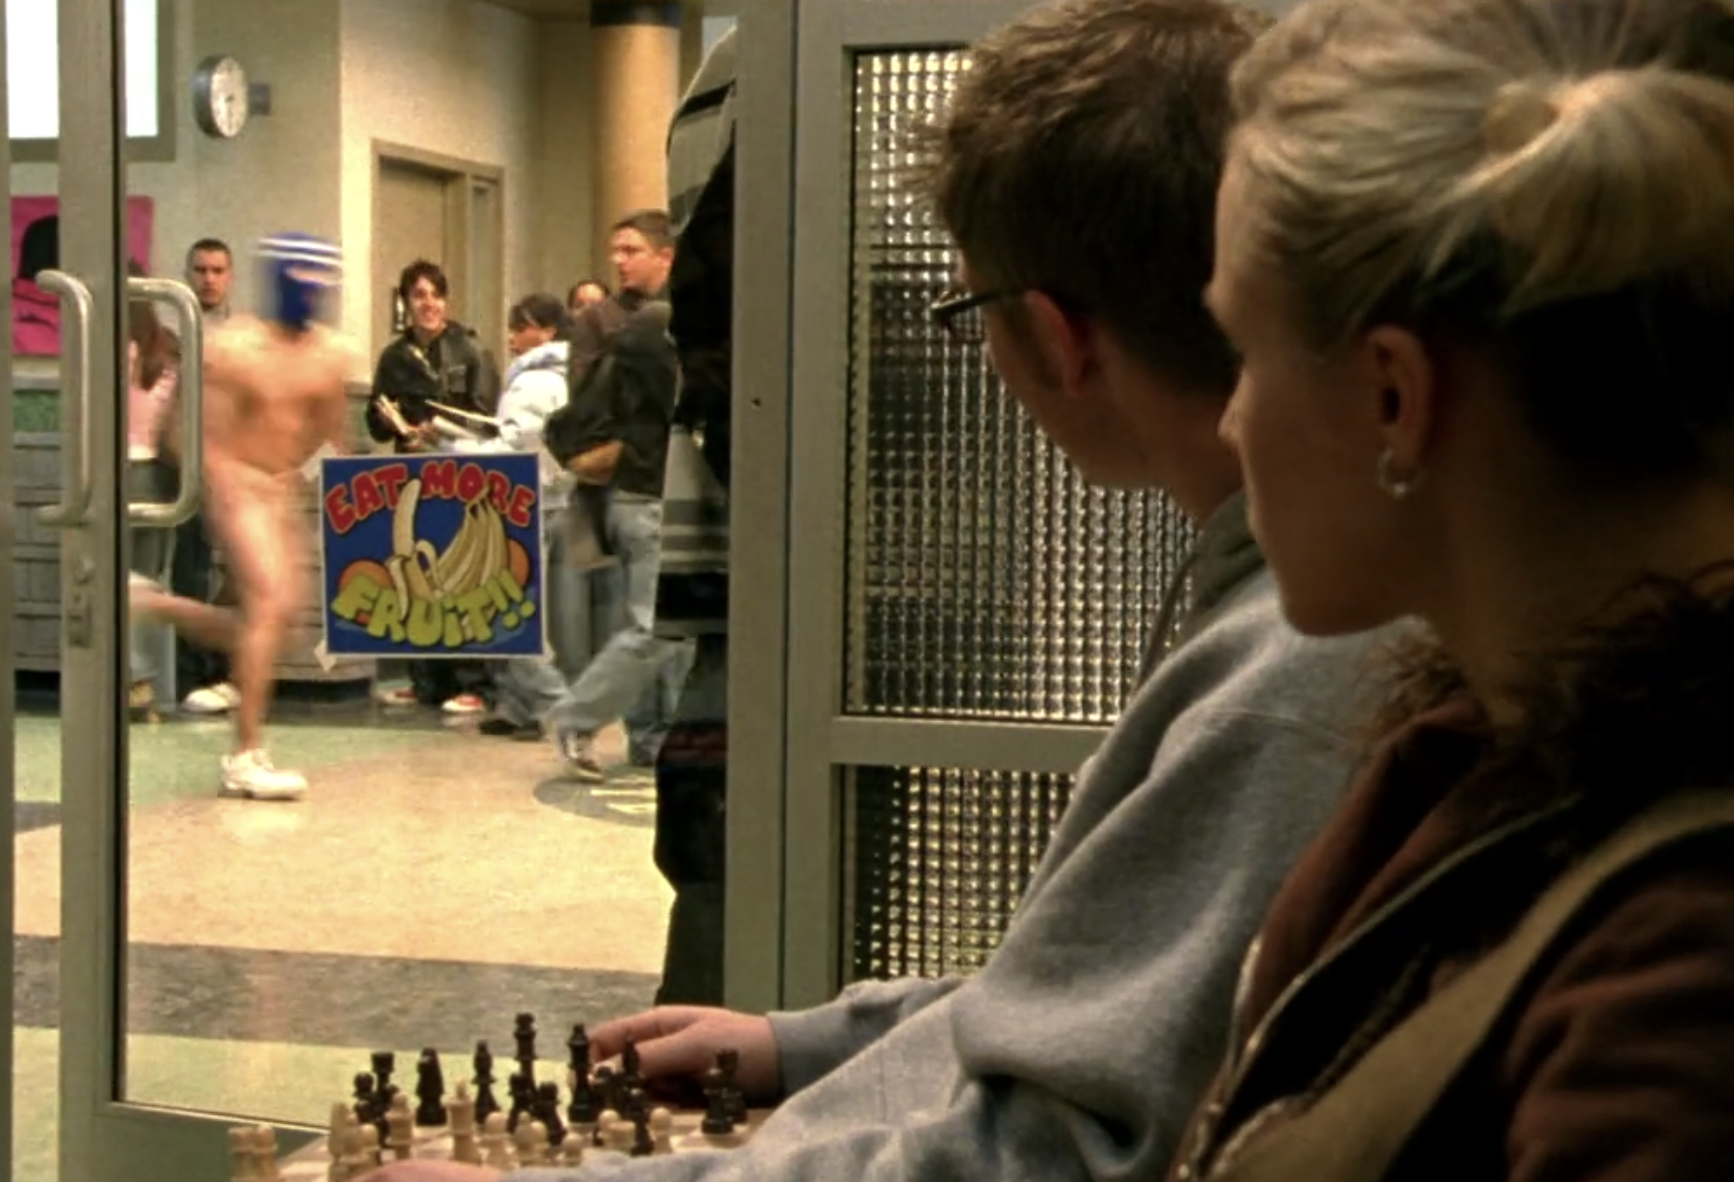 Screenshot from S1E12 of Veronica Mars. Veronica and another student are looking through a glass door at a student running naked down the hallway of Neptune High wearing only a ski mask and sneakers. On the door is a sign that reads "Eat More Fruit!!" with an illustration of bananas and oranges.